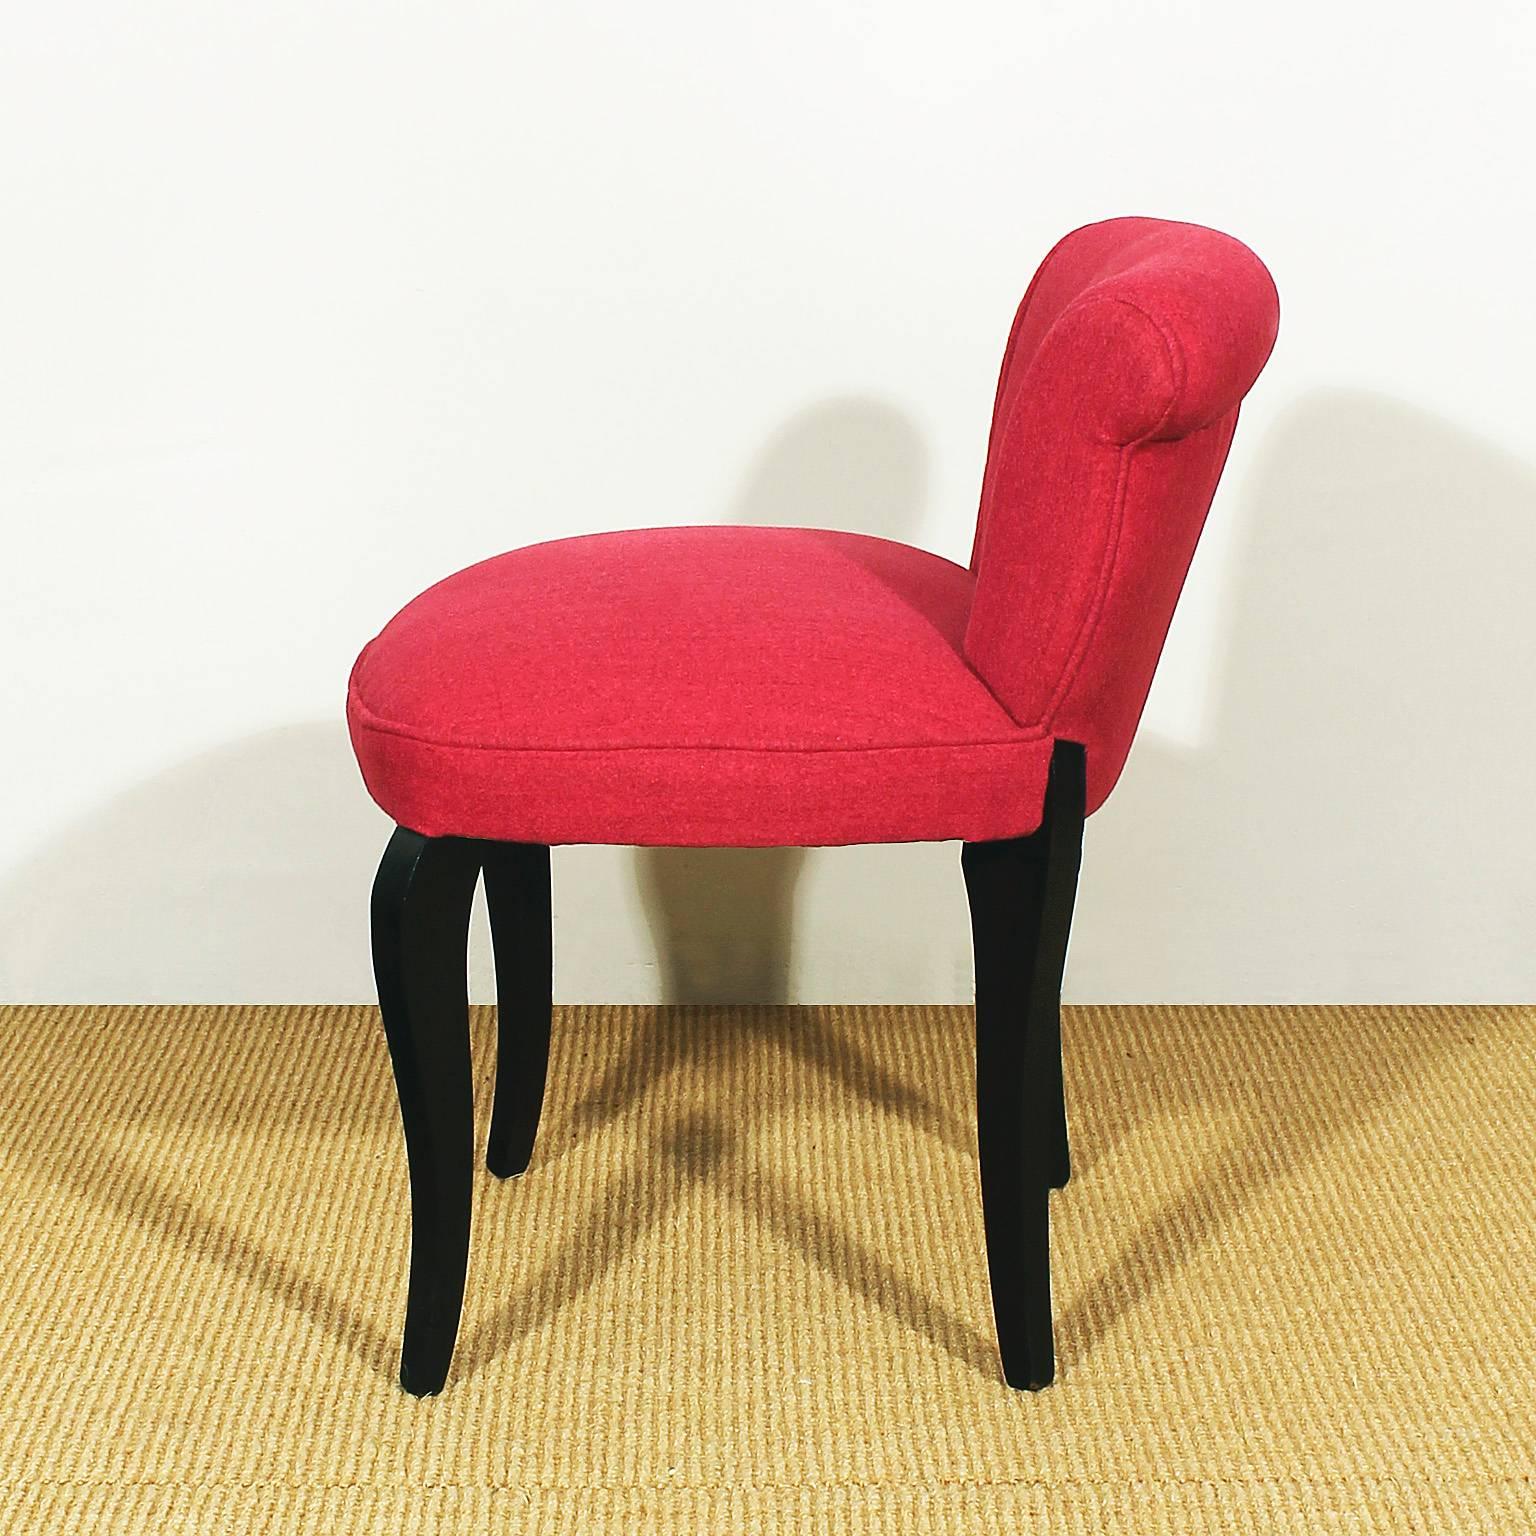 French 1940s Low chair, beech, felt upholstery - France